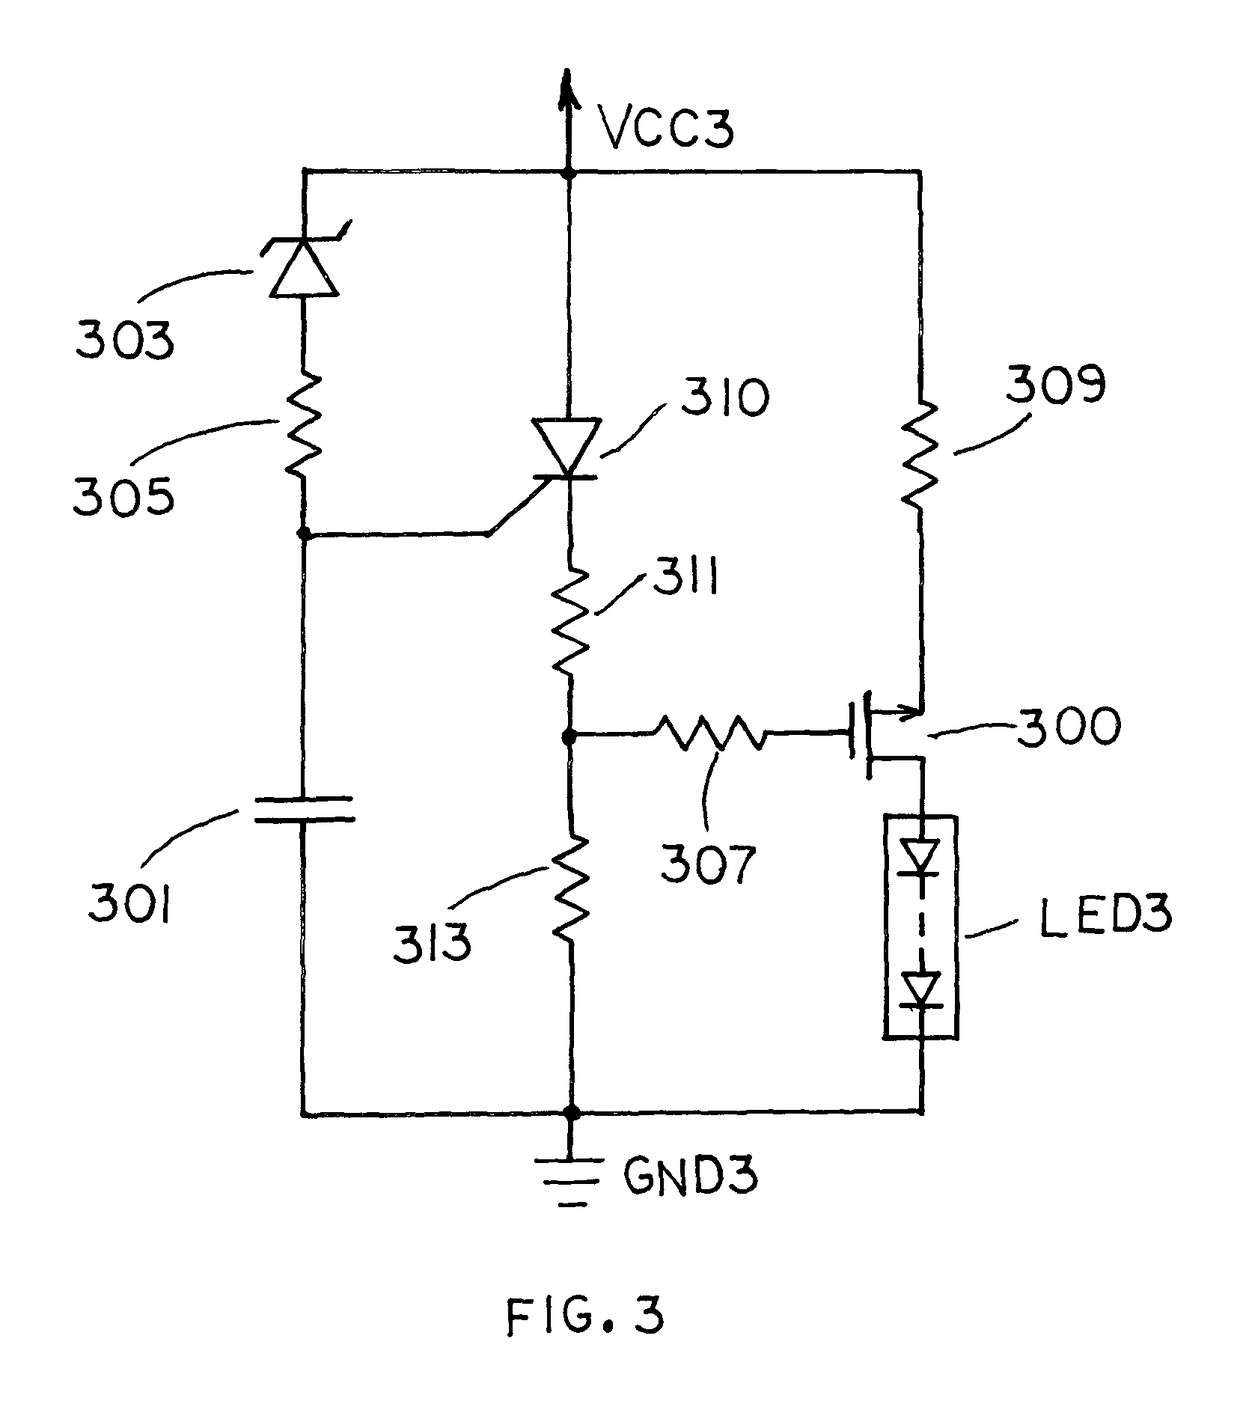 Led thyristor switched constant current driver